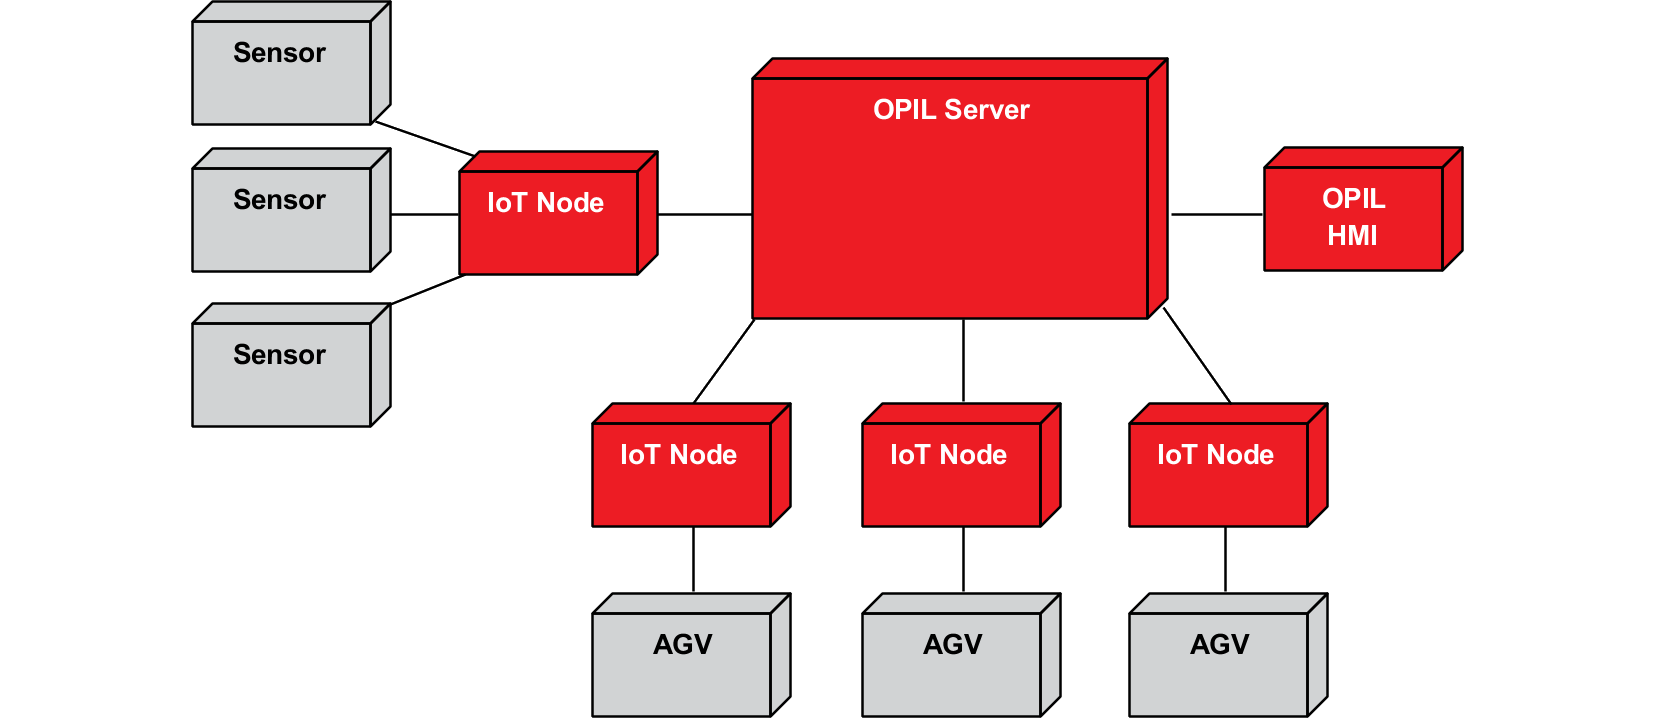 OPIL Server and IoT Nodes